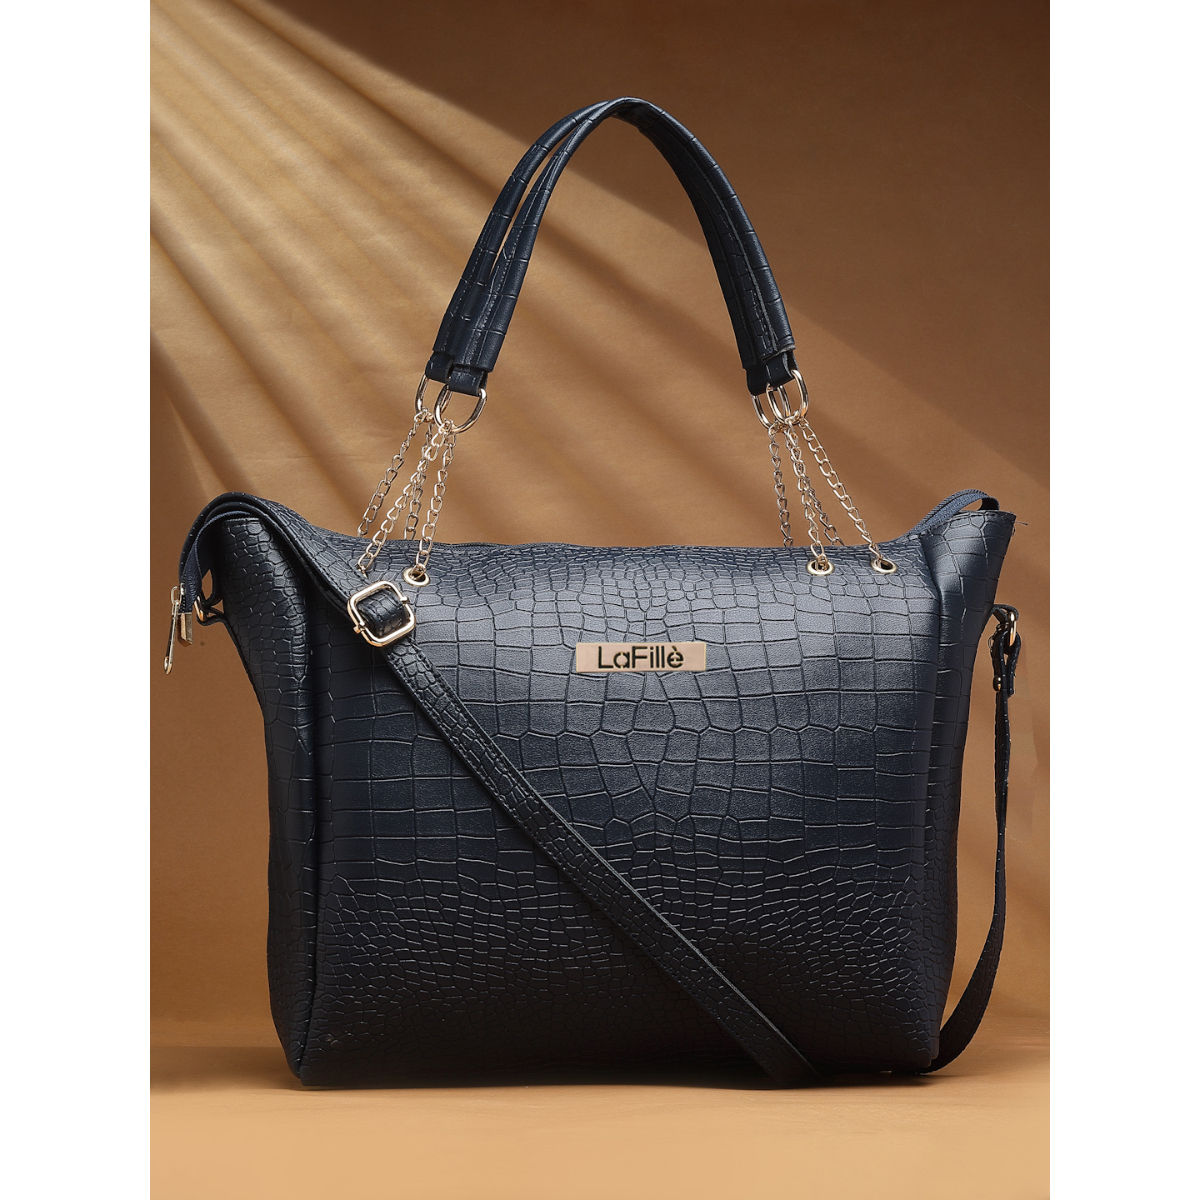 WD4990) Office Bags for Ladies Fashion Bags New Bag Style Online Shopping  Ladies Purse - China Designer Bag and Lady Handbag price | Made-in-China.com